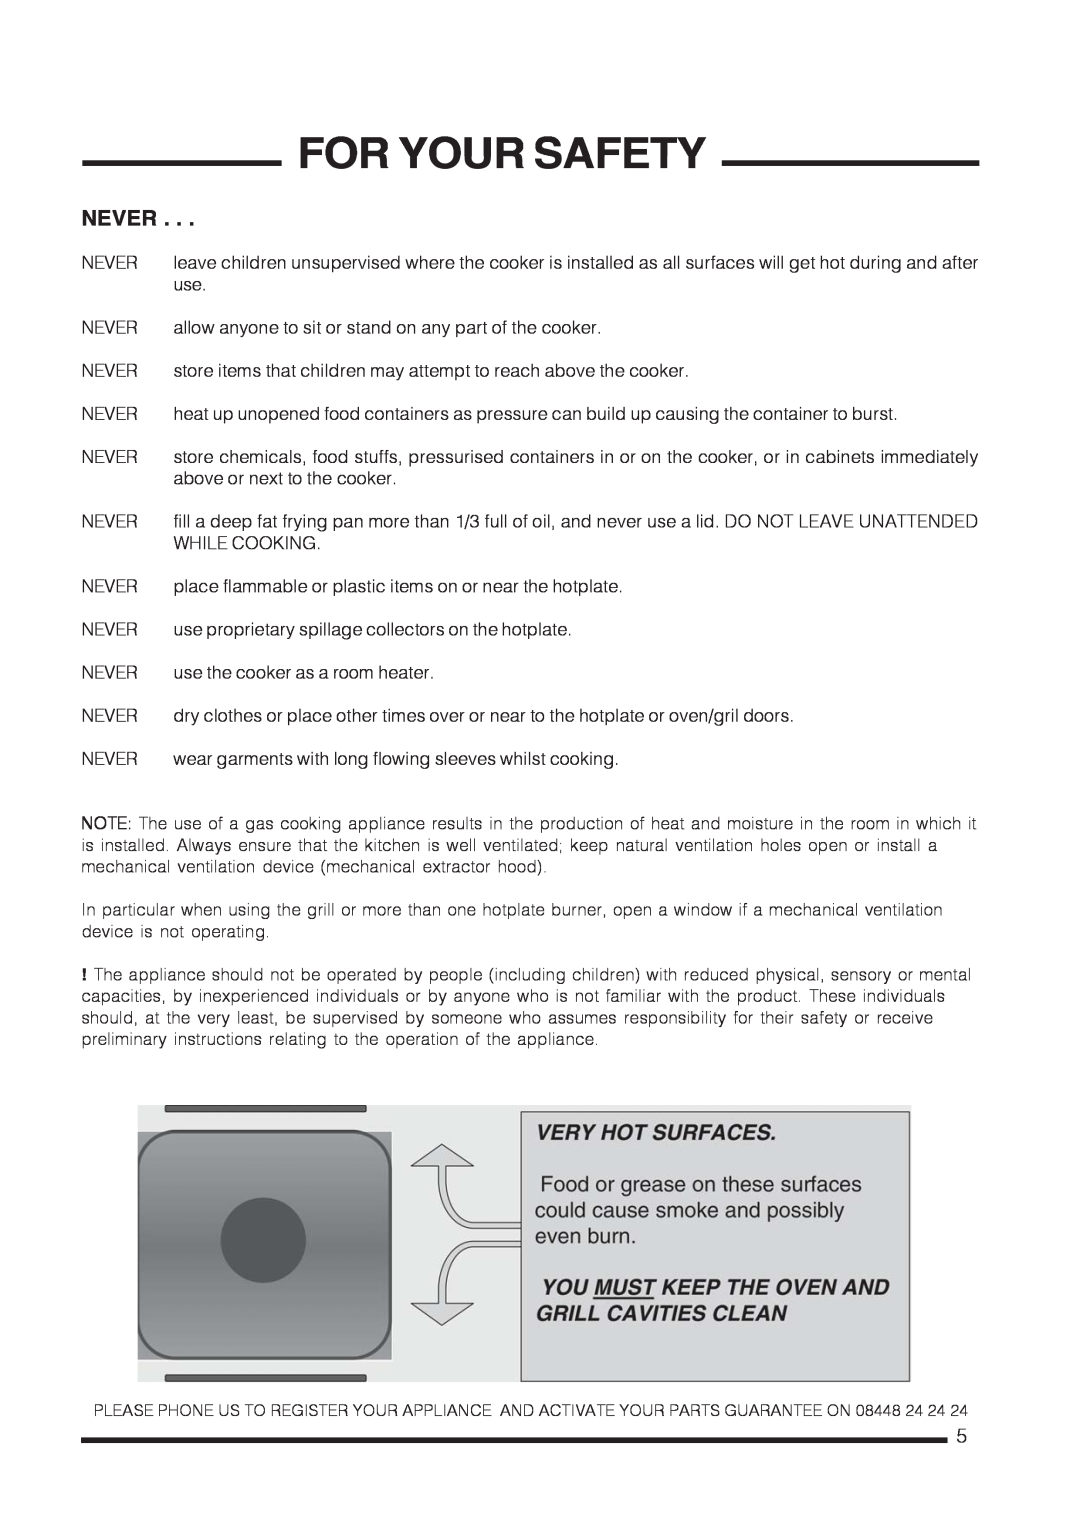 Hotpoint CH60GTXF, CH60GTCF installation instructions Never, For Your Safety 